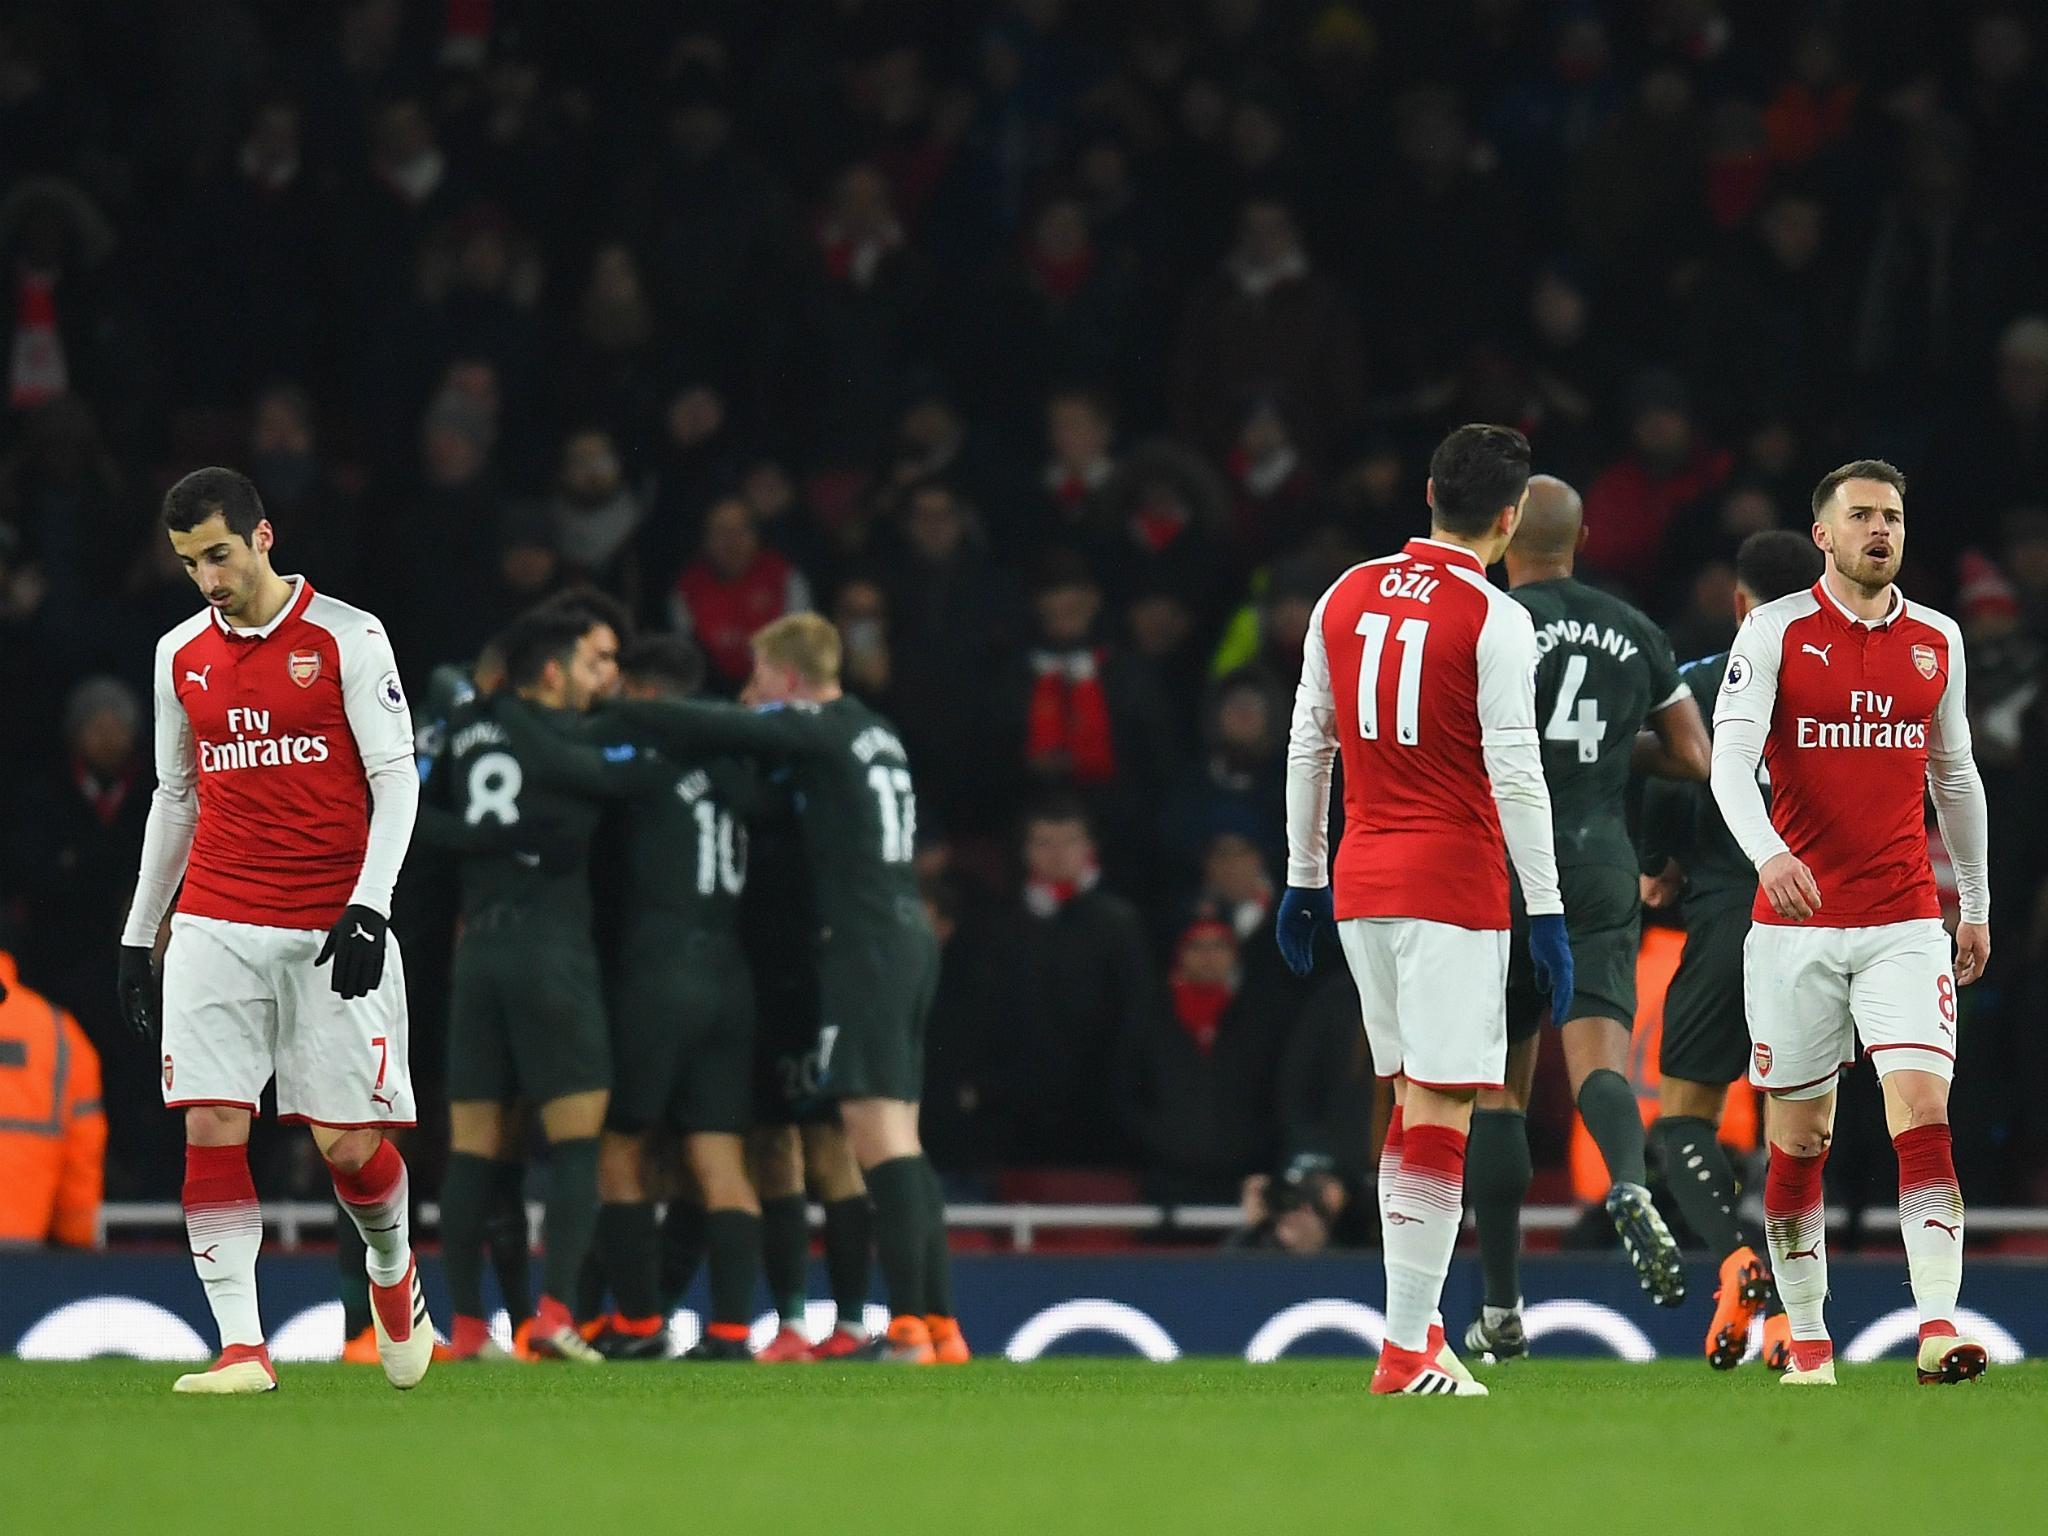 Arsene Wenger has spoken of his need to rebuild his players' confidence after the defeats by Manchester City